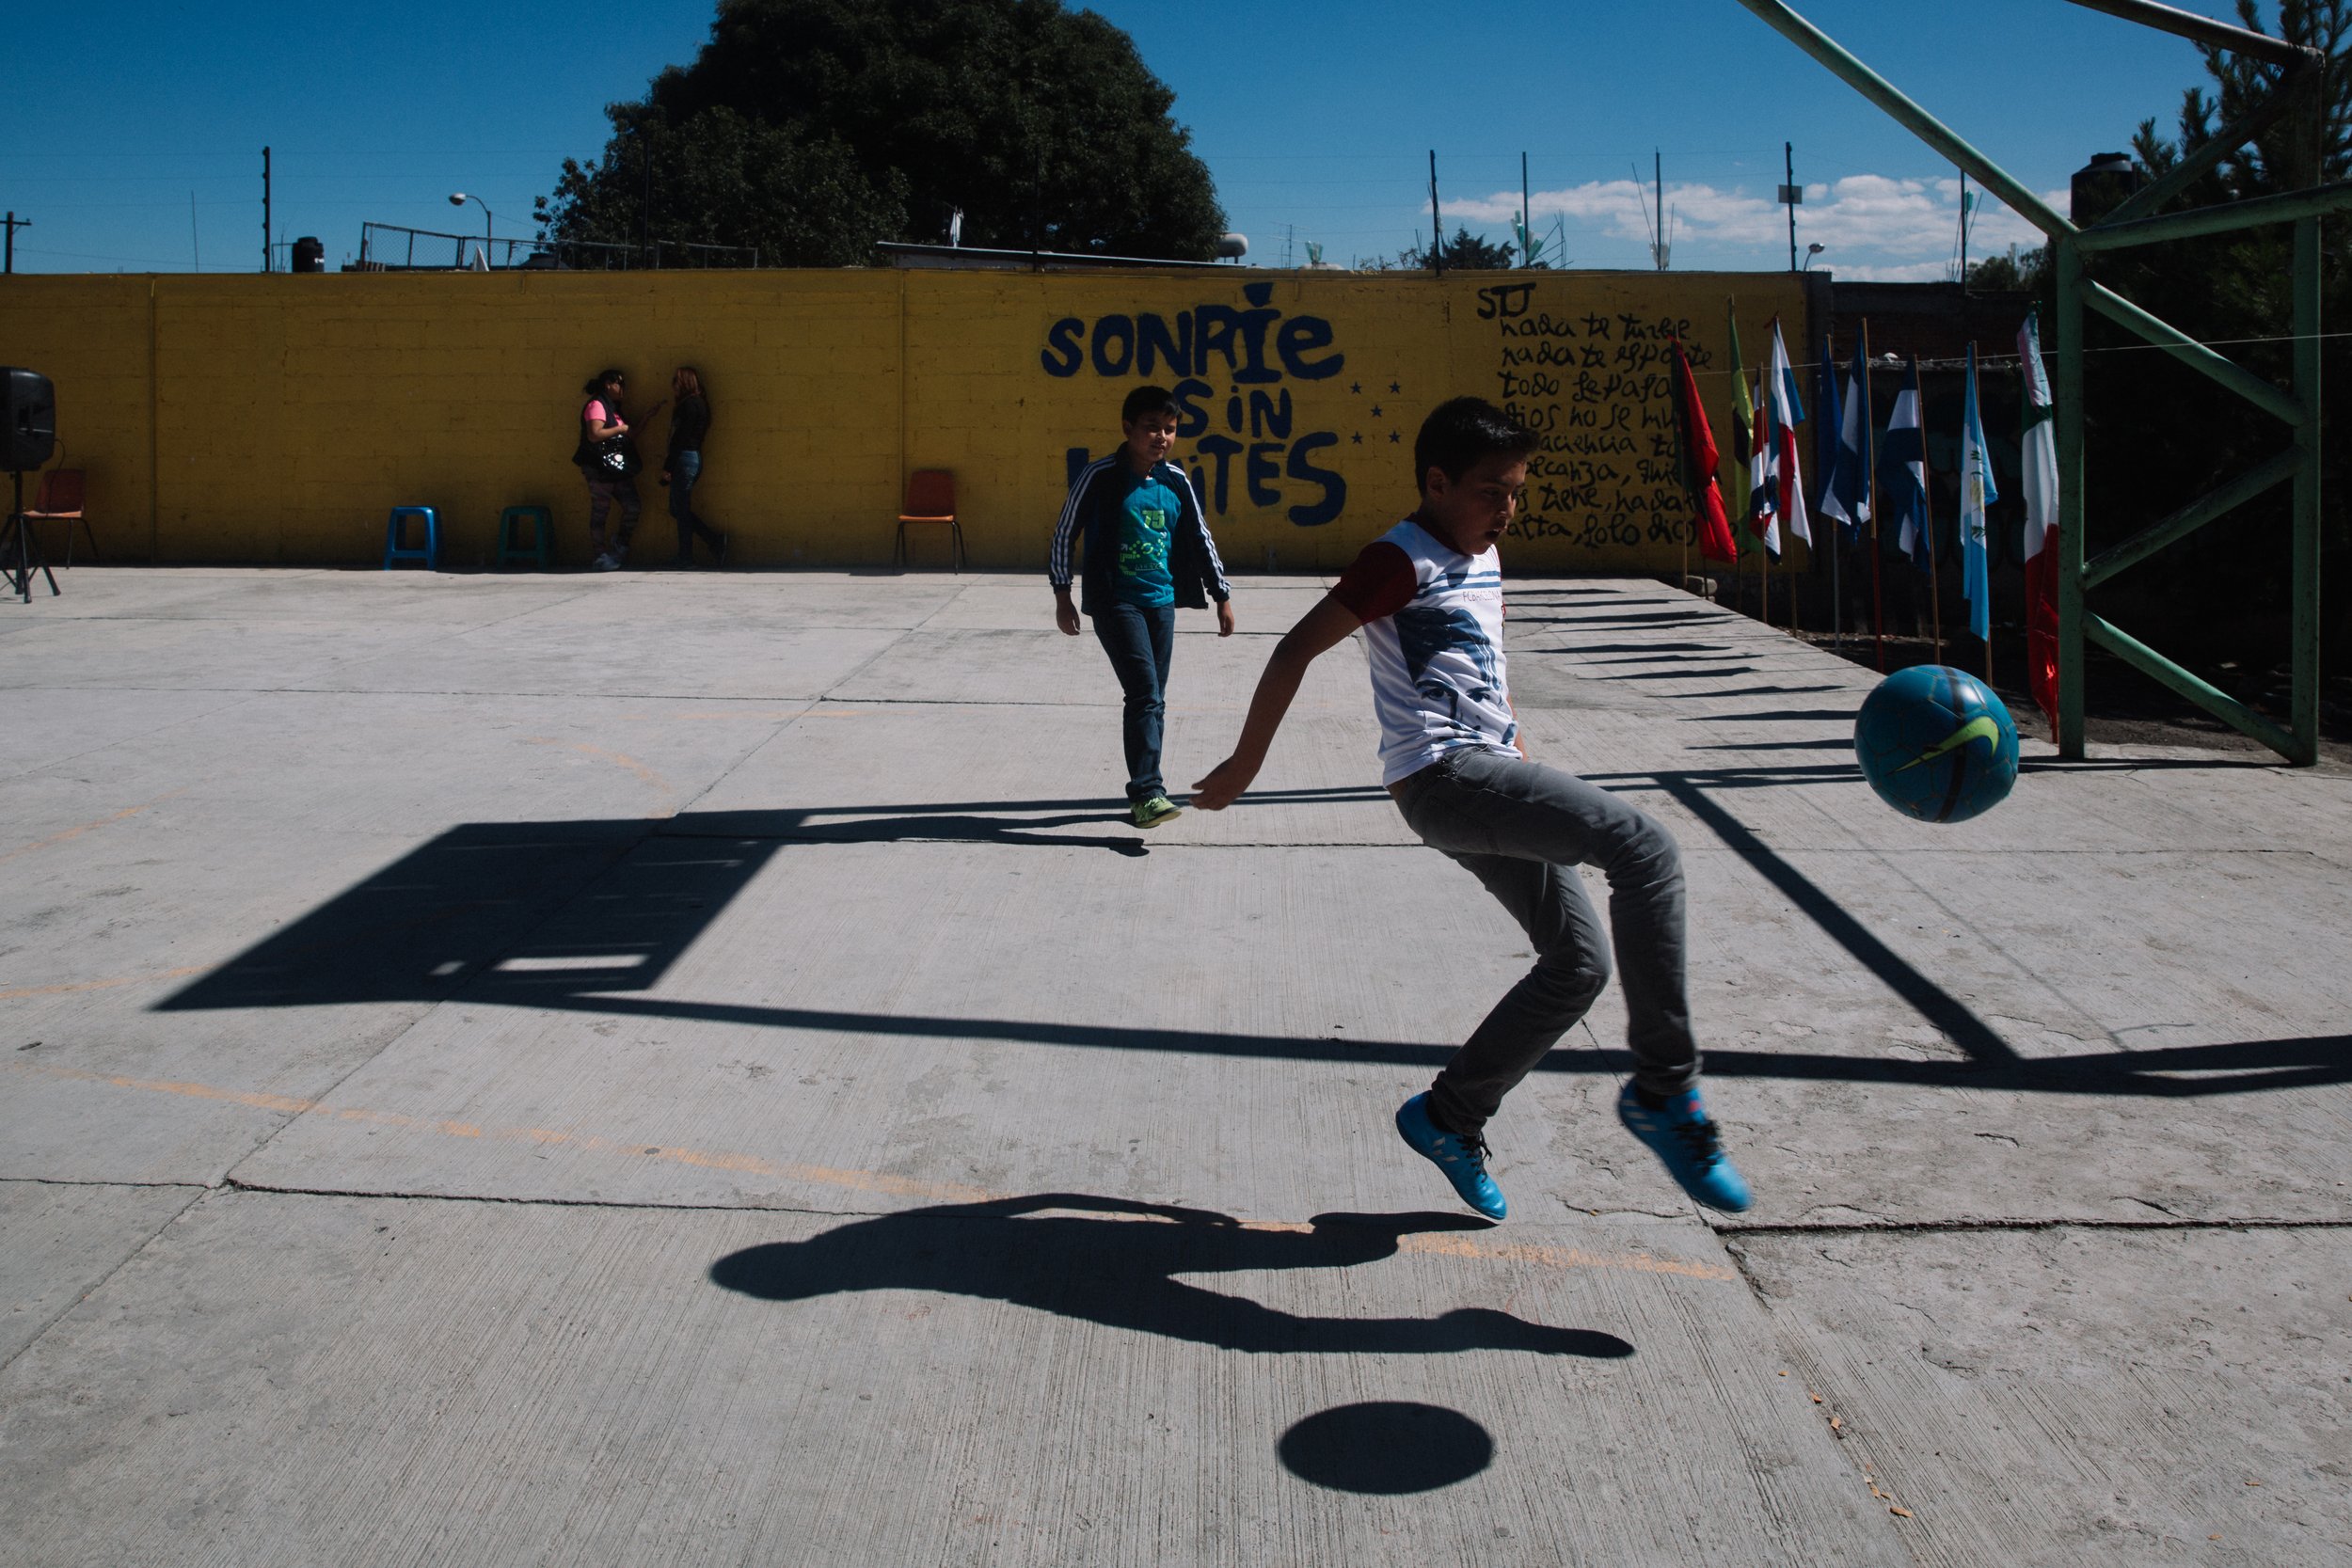  In the midst of the challenging and uncertain life of migration, children find solace and joy by playing soccer in the courtyard of the Albergue La Sagrada Familia migrant shelter in Apizaco, Tlaxcala, Mexico. 